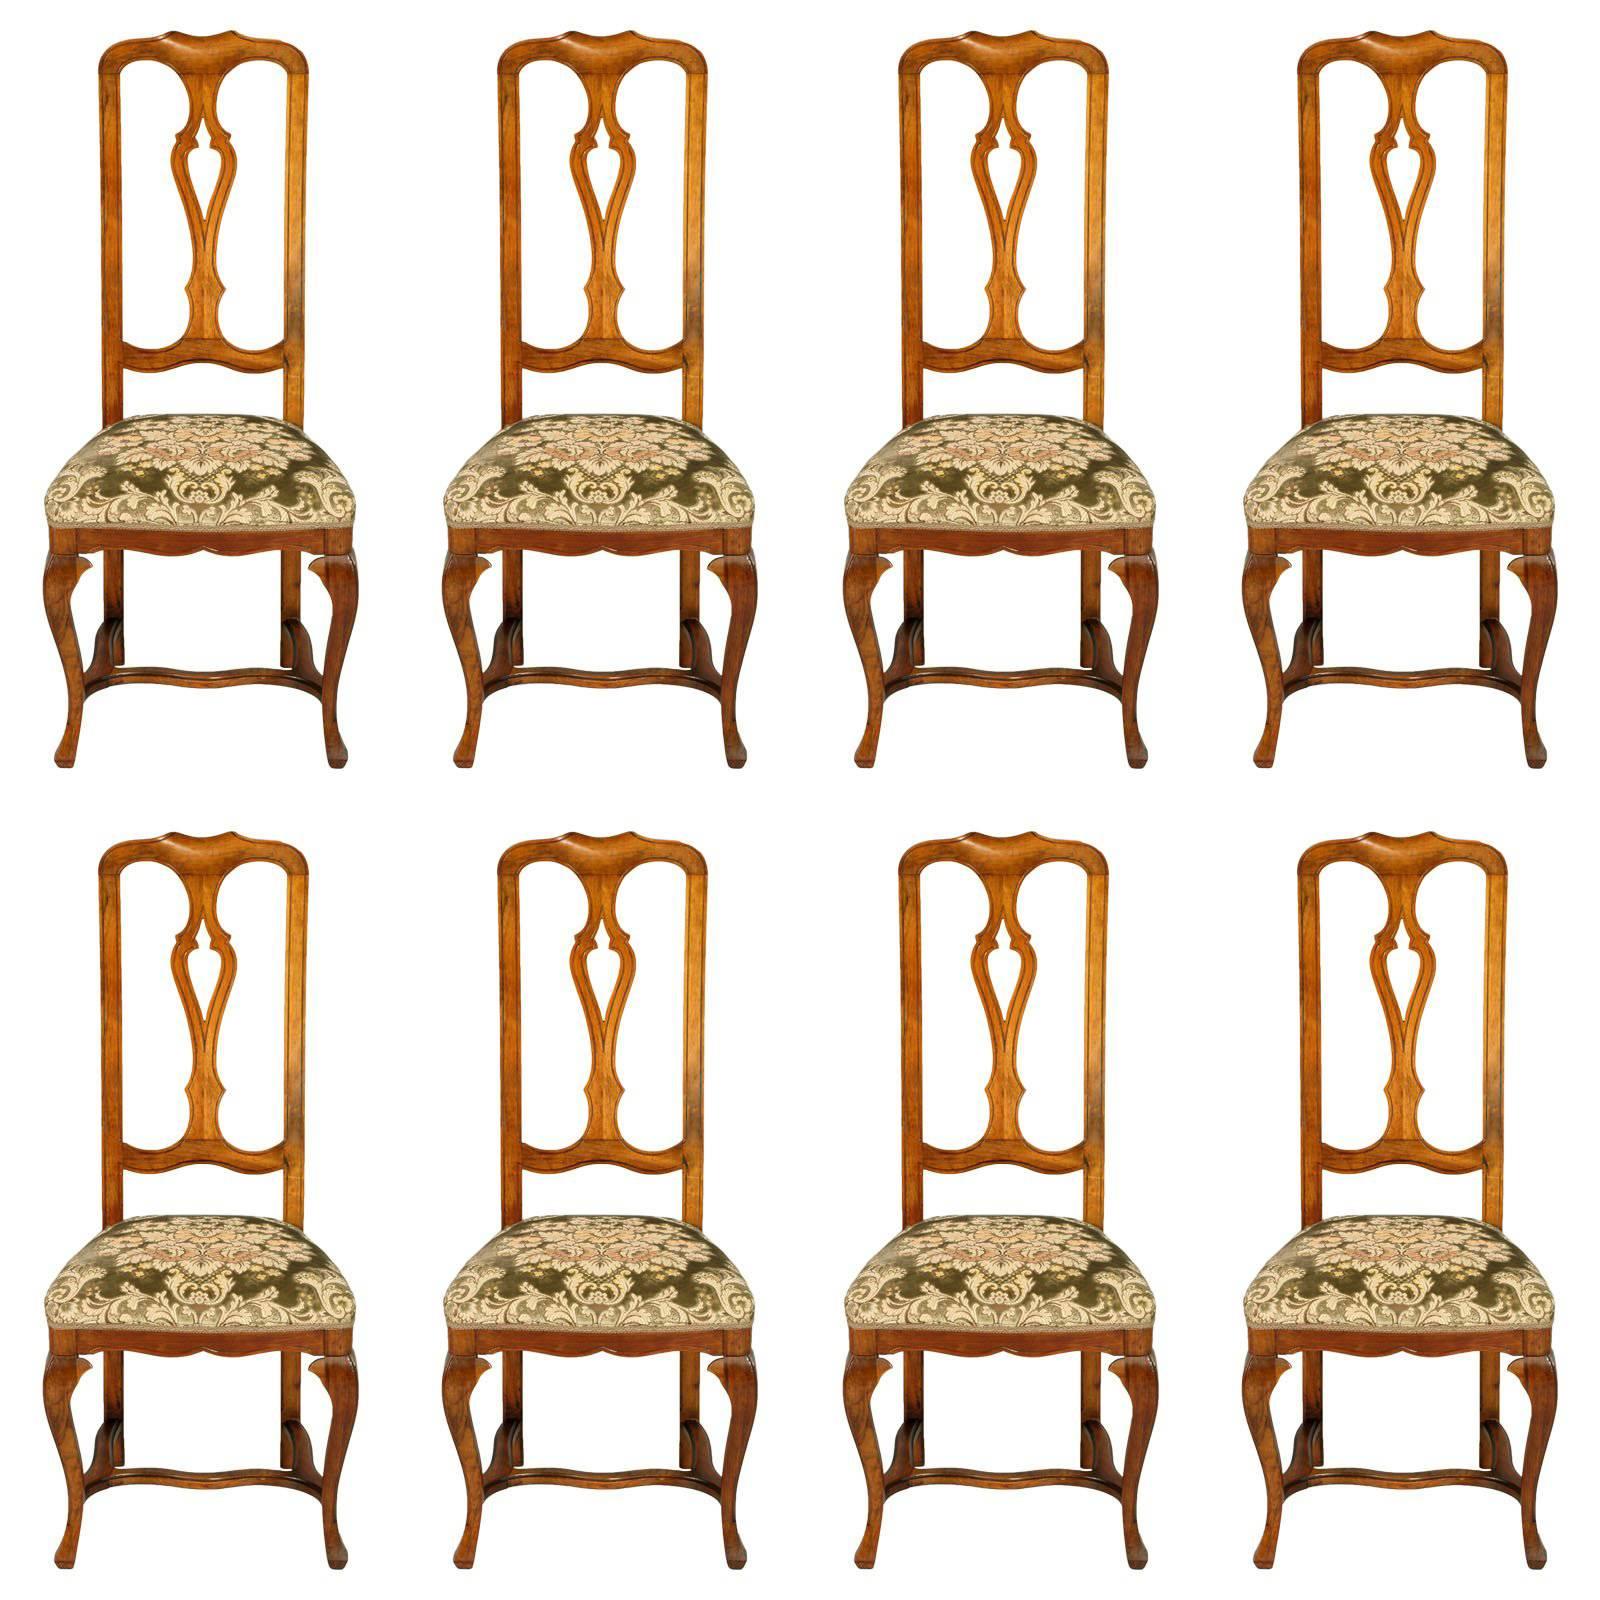 19th Century Antique Venetian Baroque Set of Eight Chairs in Blond Walnut